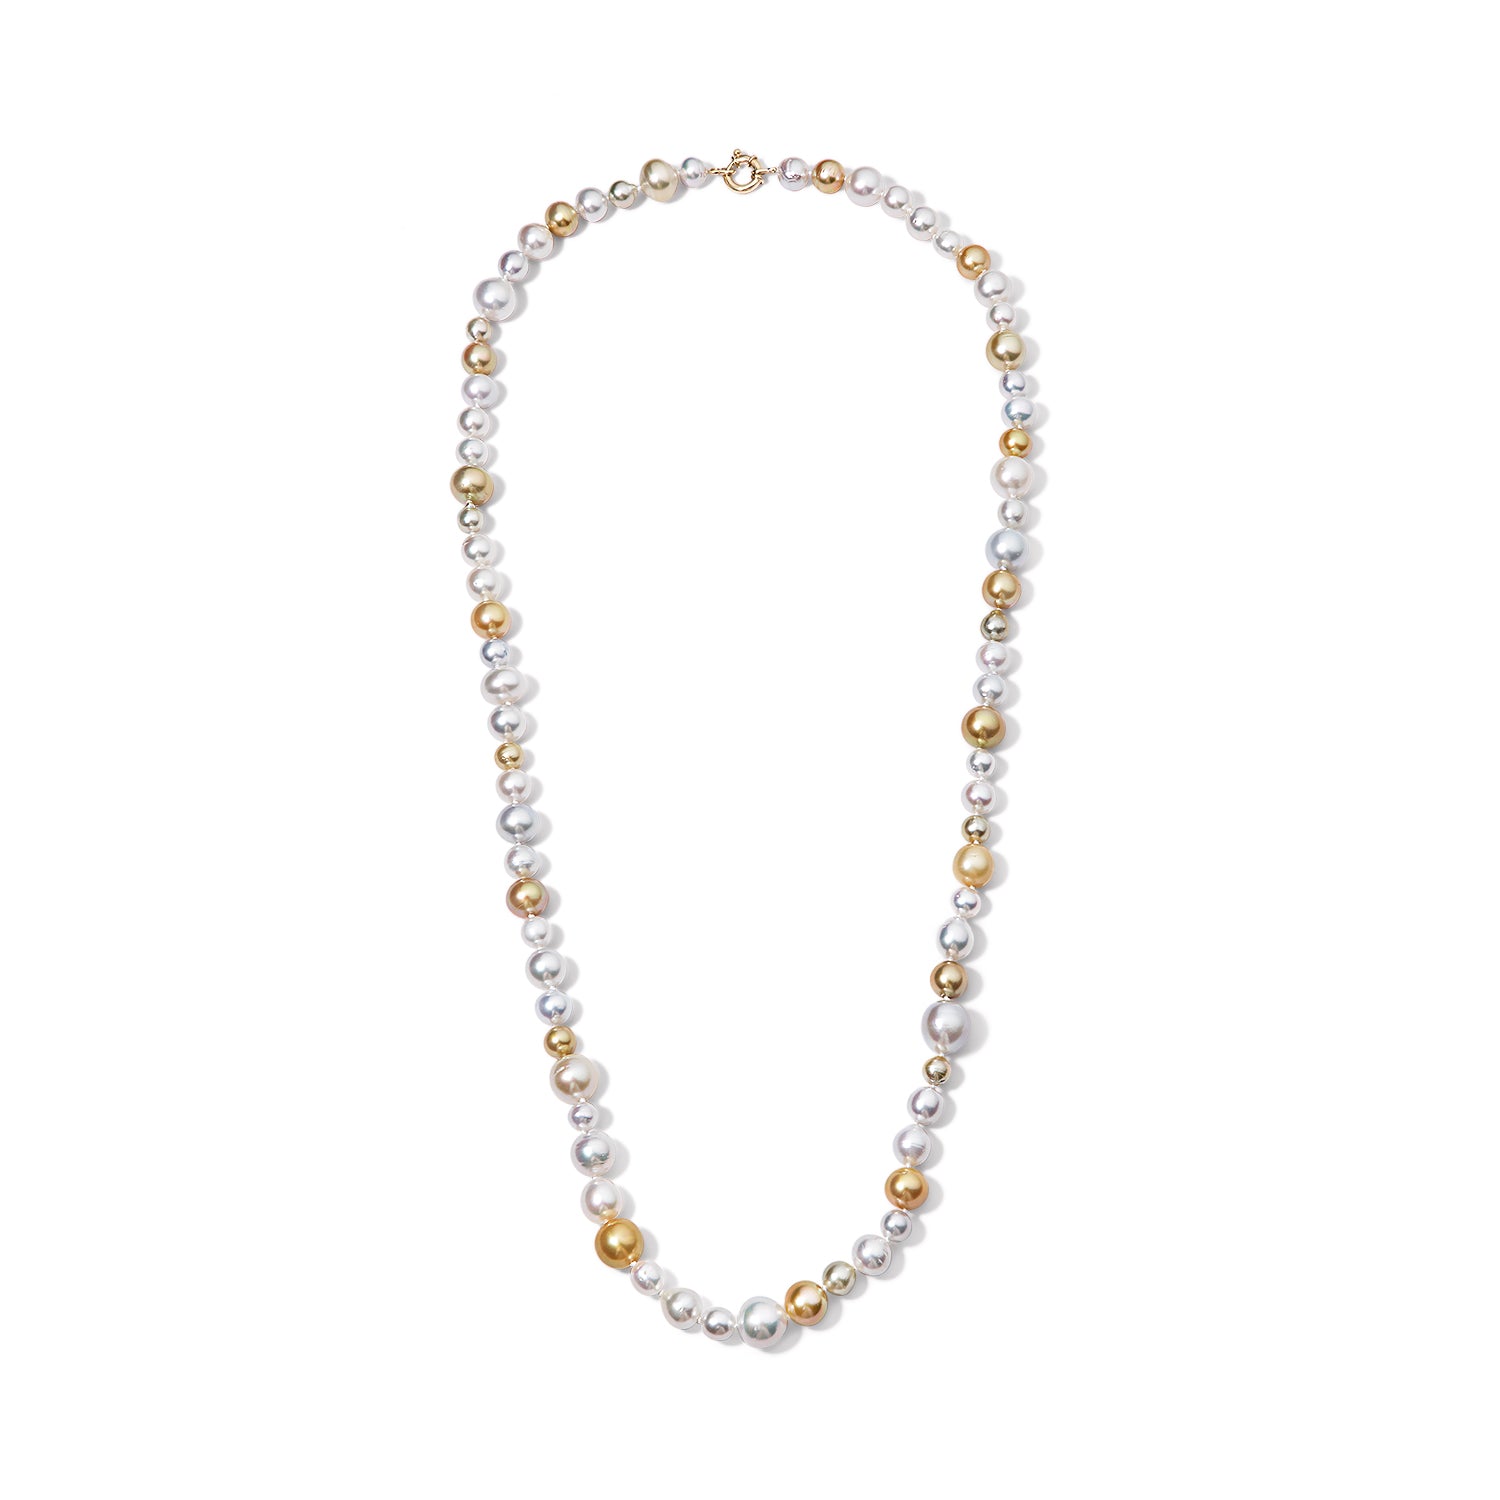 White and Gold South Sea Pearl Necklace Double Wrap